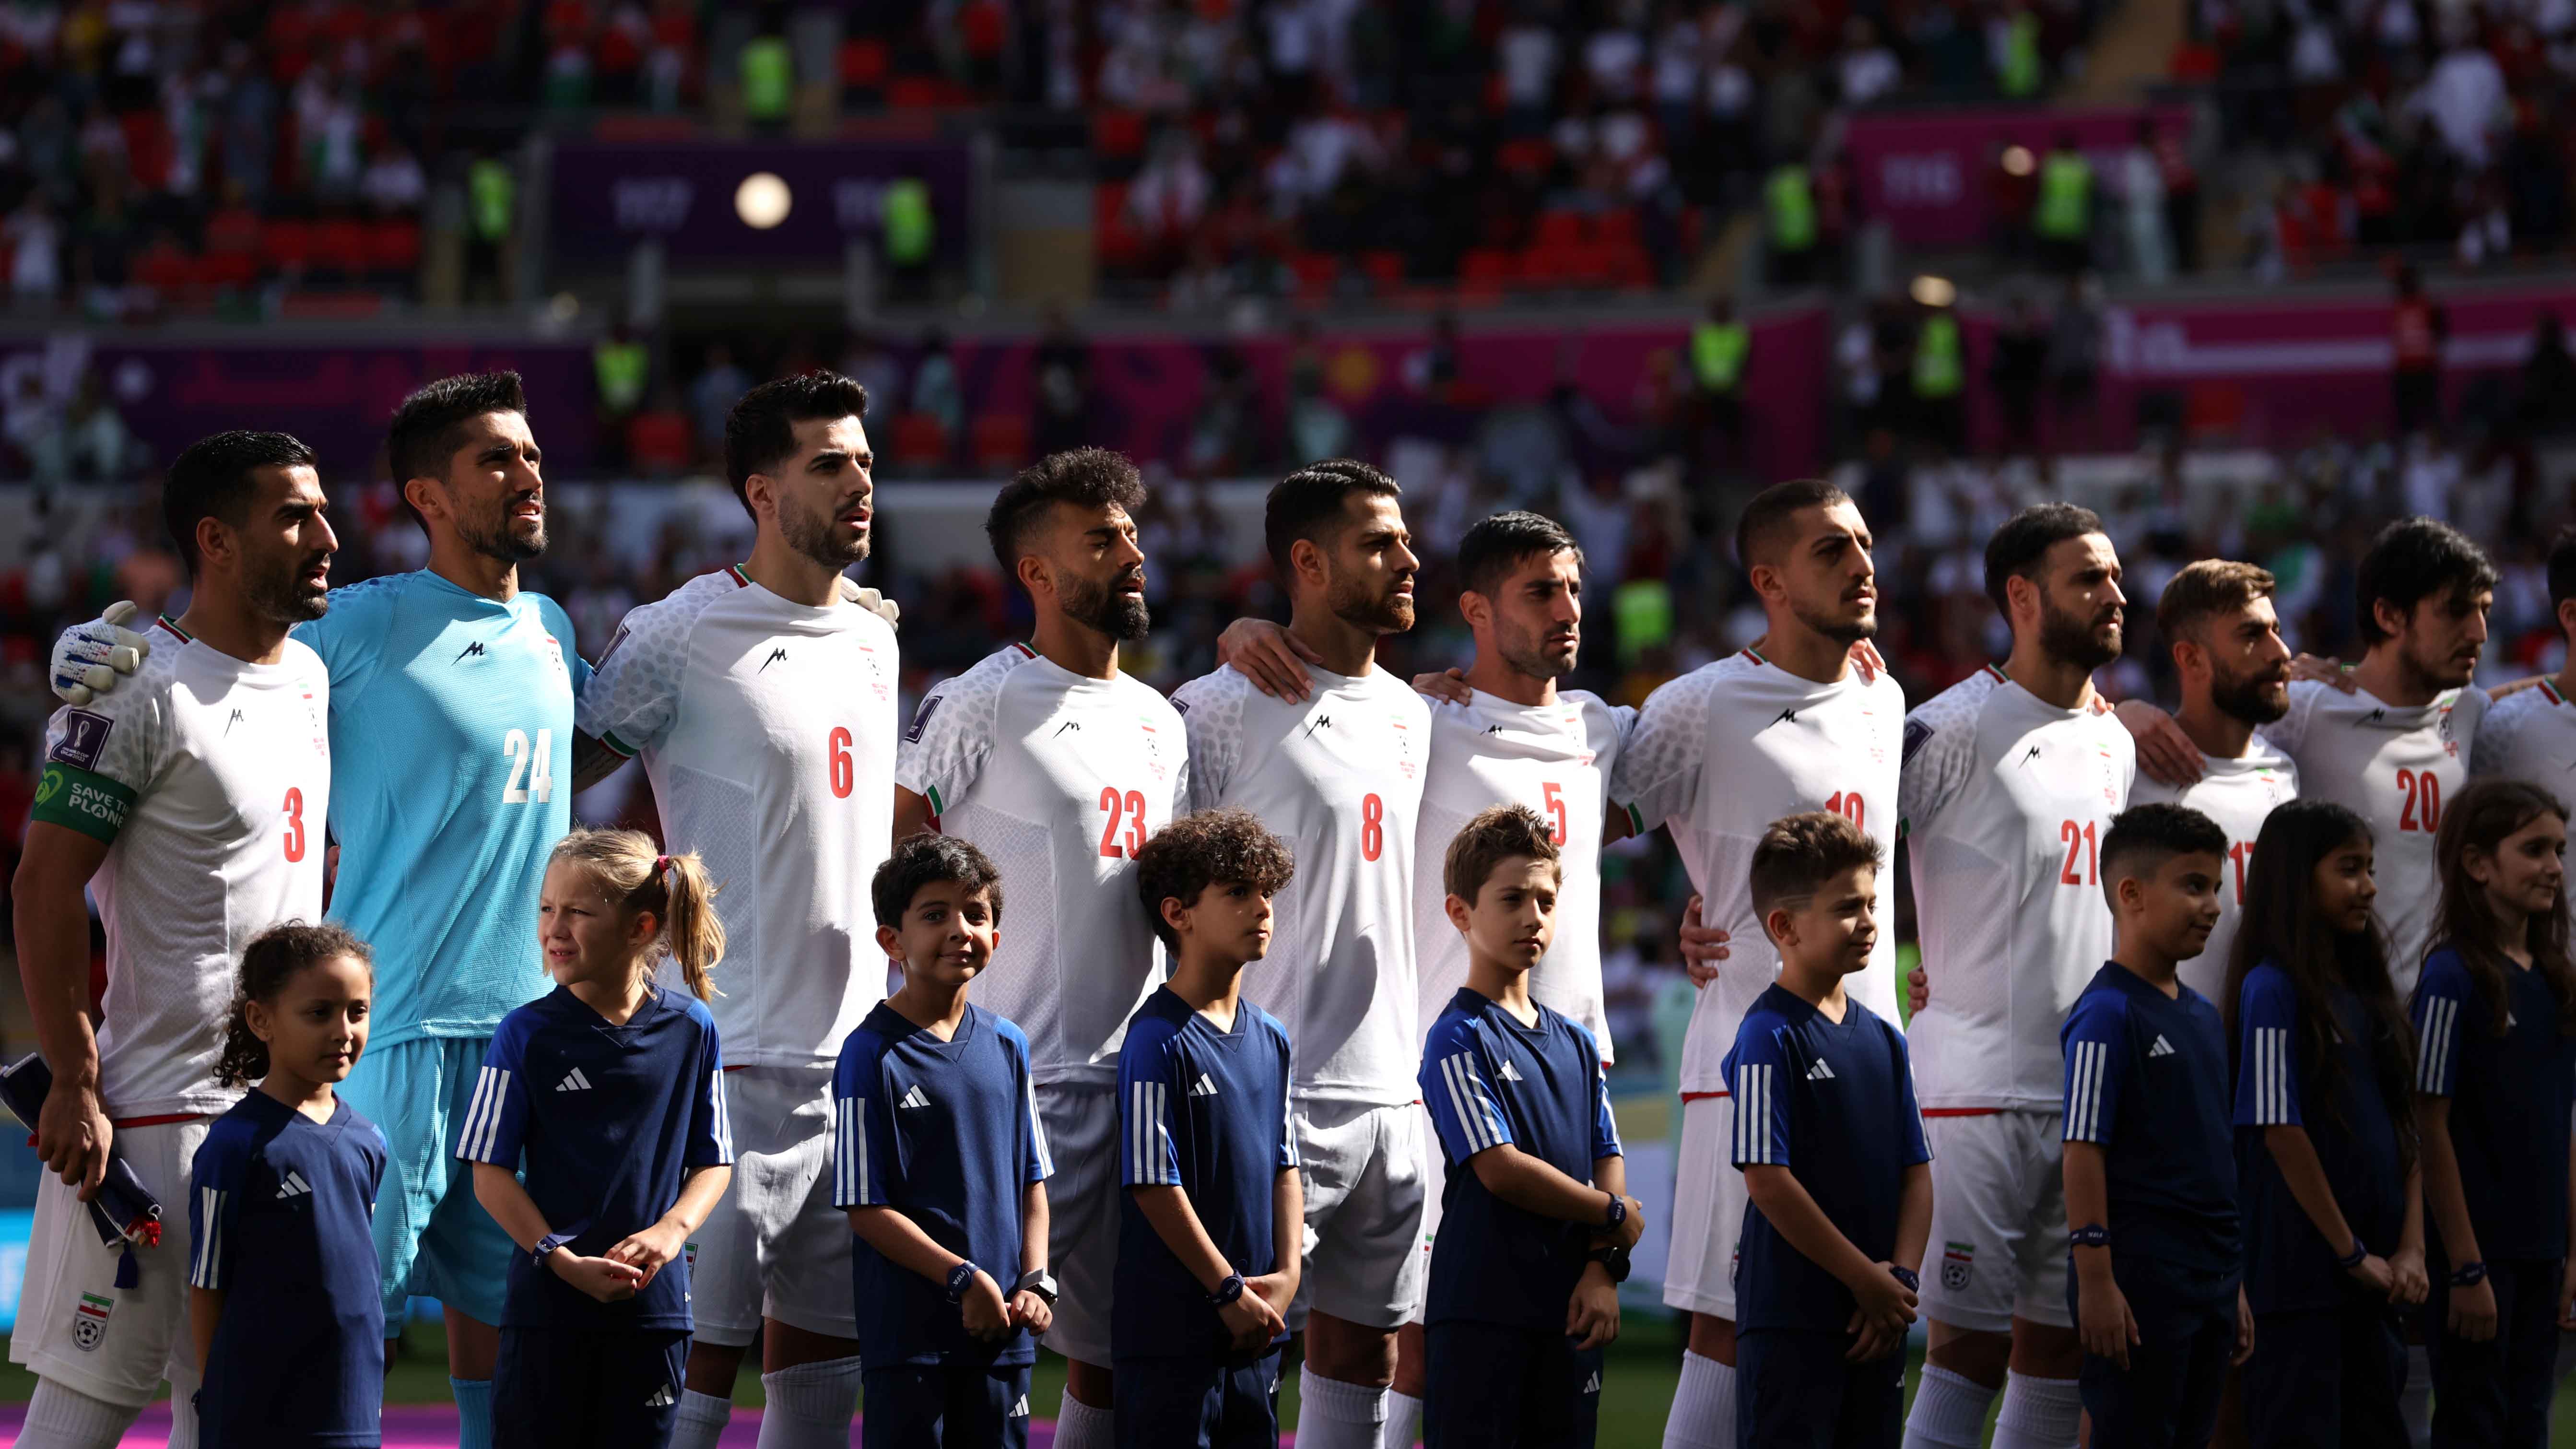 Iranian Players End National Anthem Silence at World Cup Vs. Wales